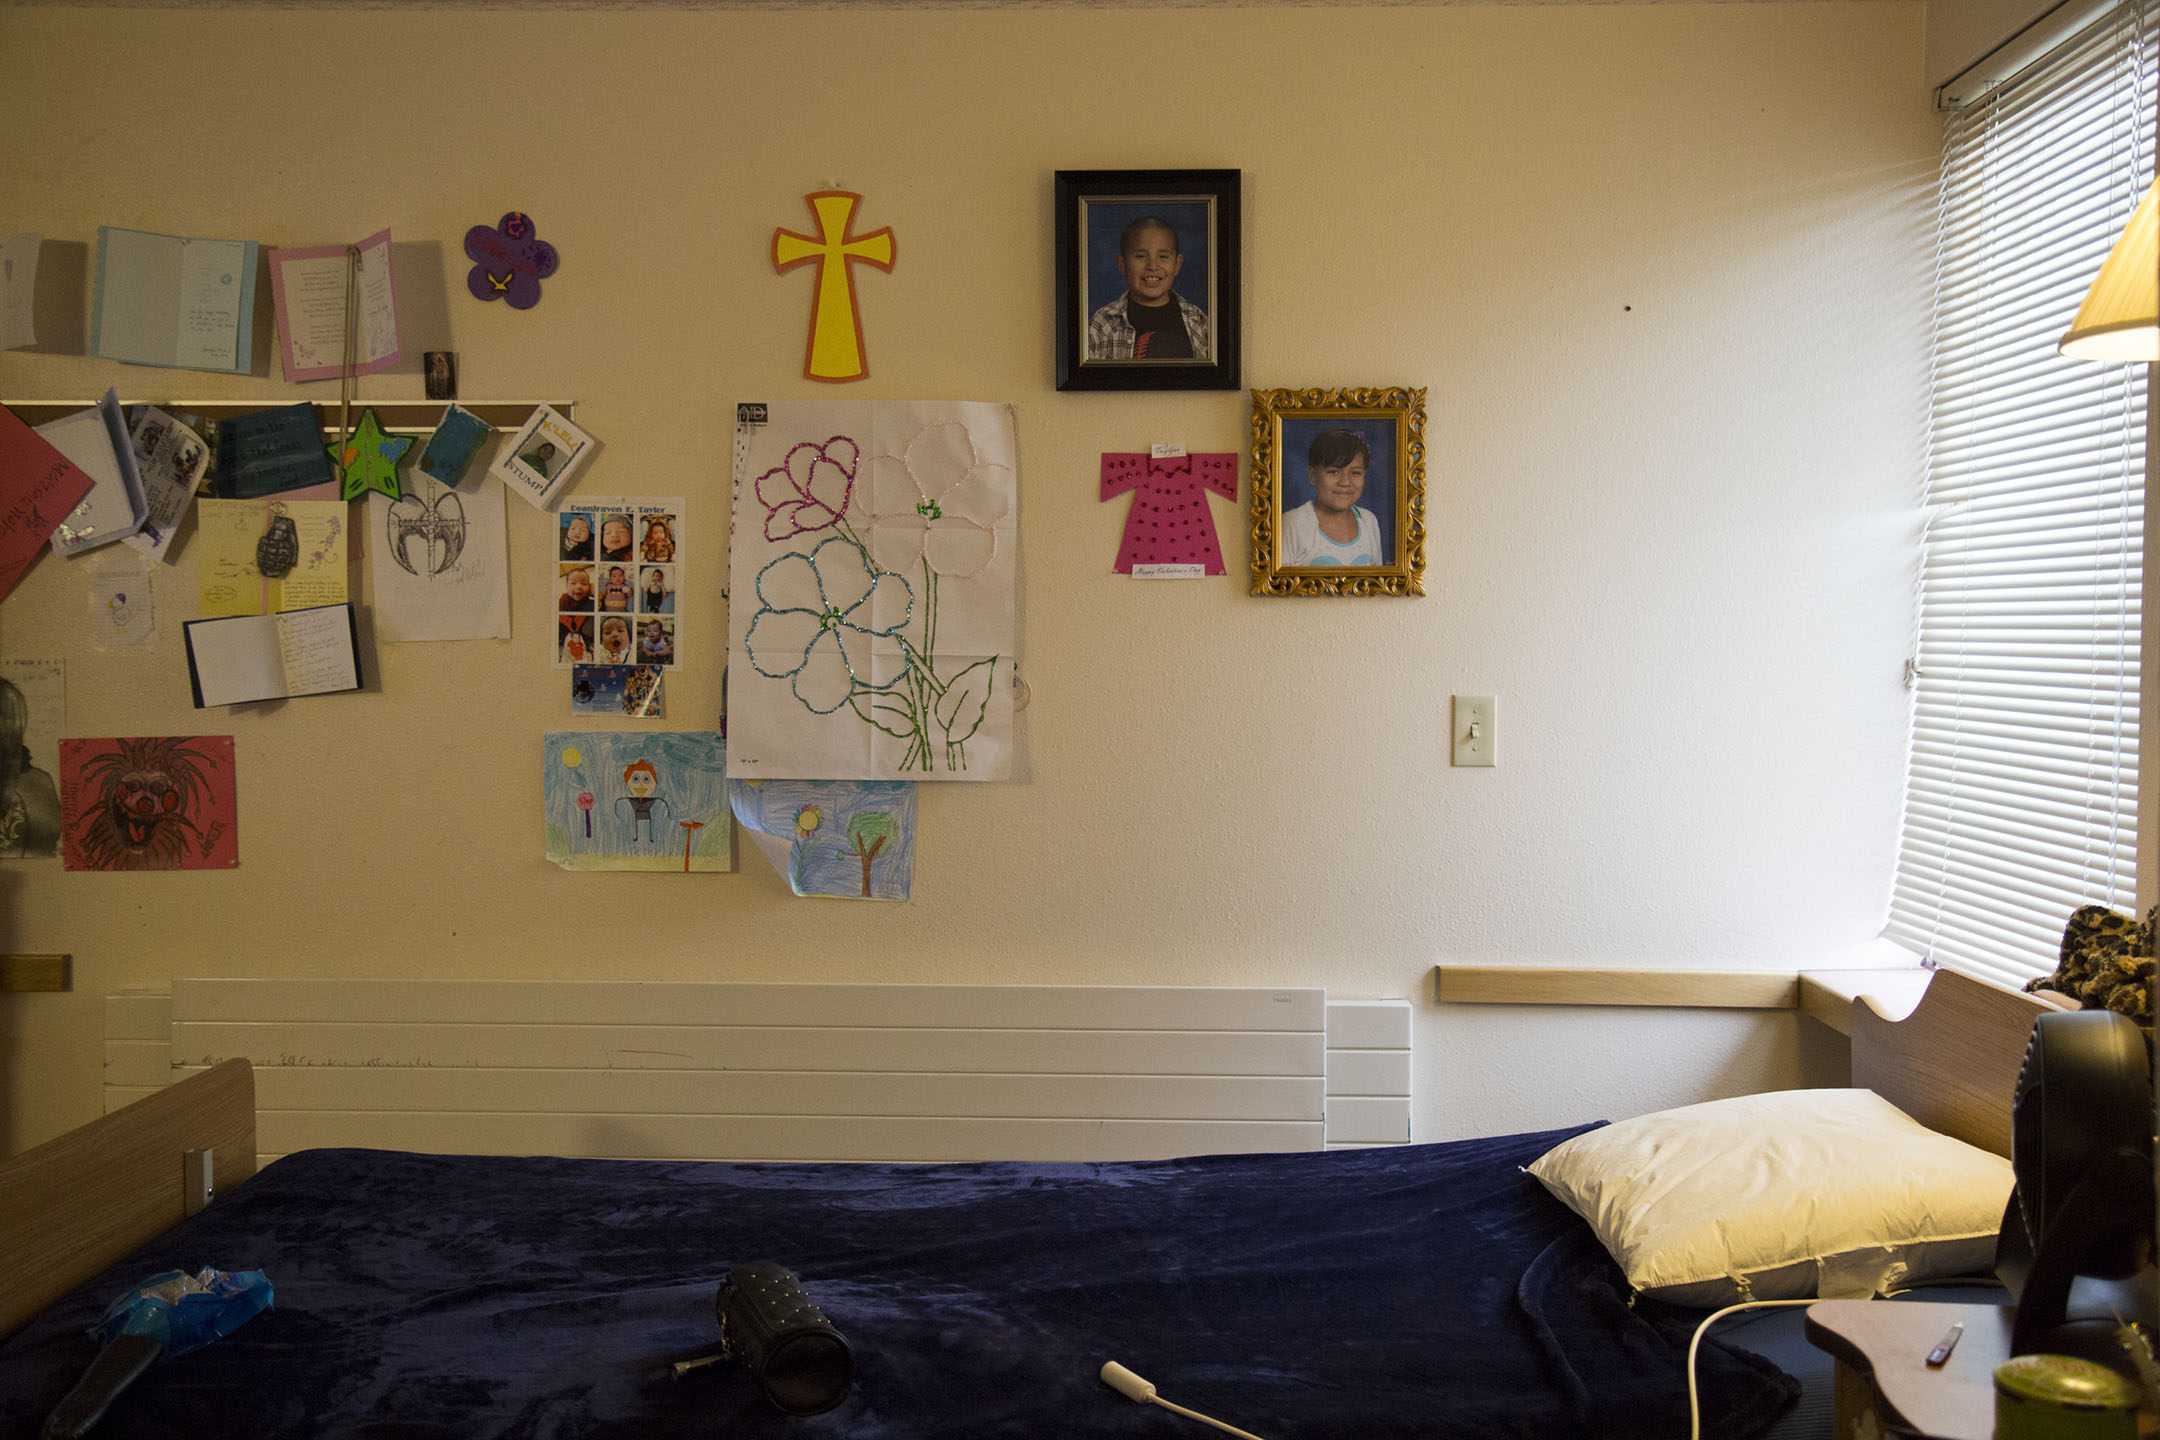 Pictures and drawings by grandchildren cover TroyLnn Shotgunn’s wall in her room at the Awe Kualawaache Care Center.